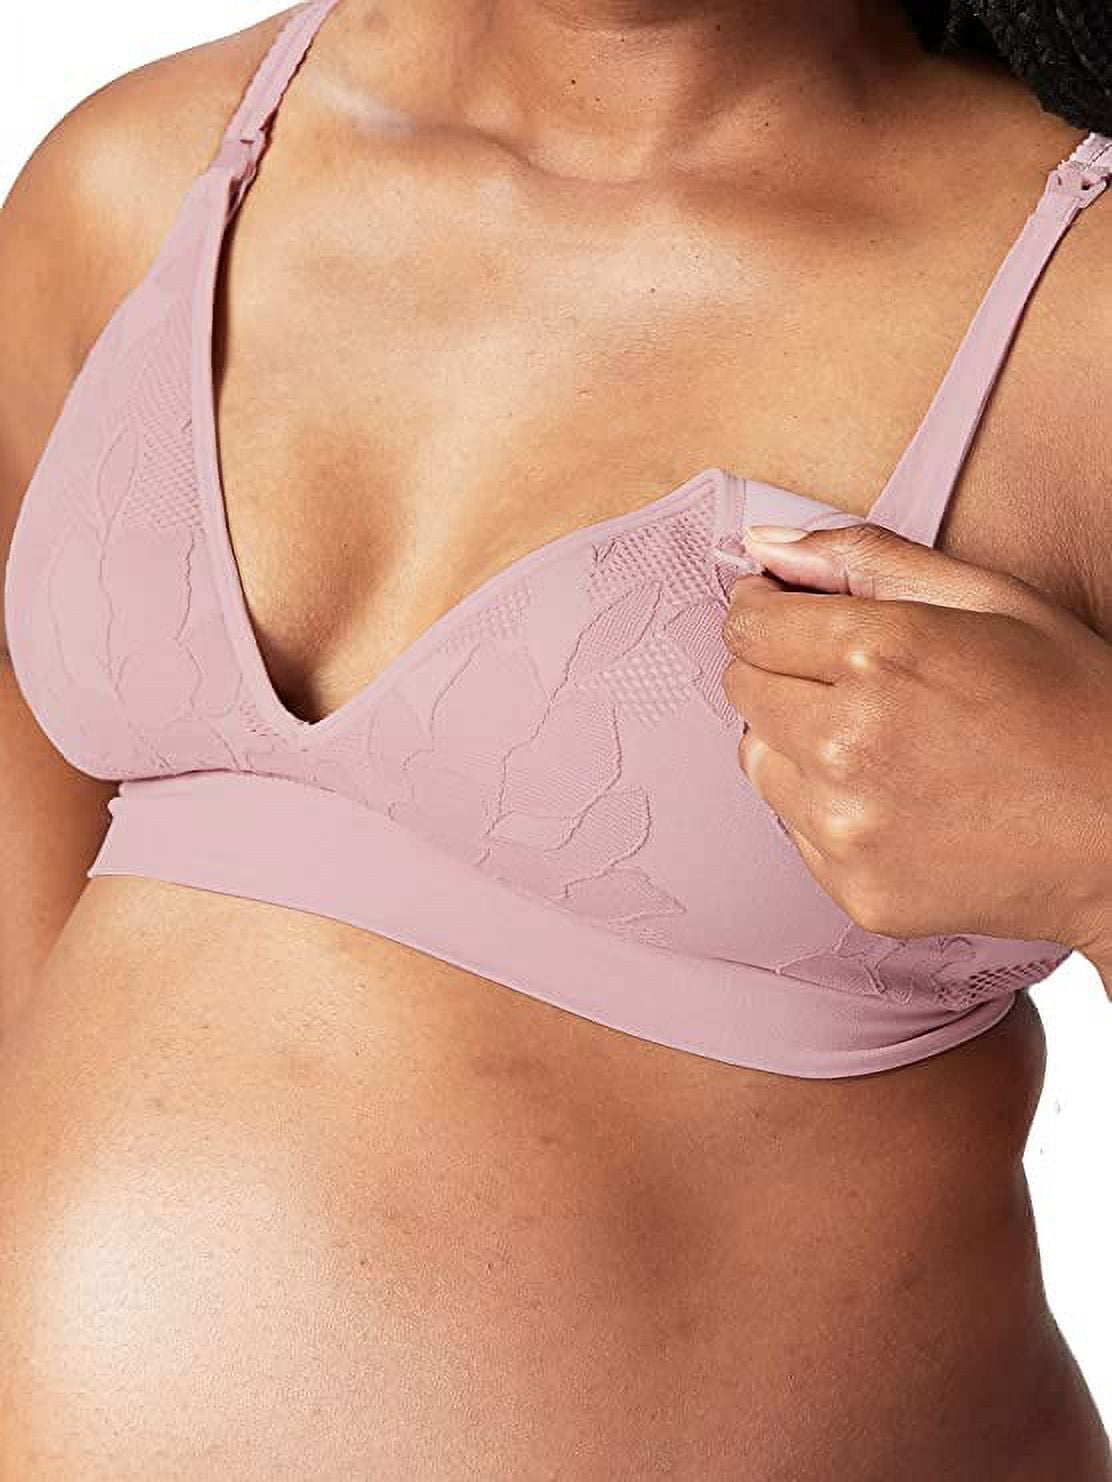 Colace While Pregnant Reviewwire-free Nursing Bra For Pregnancy